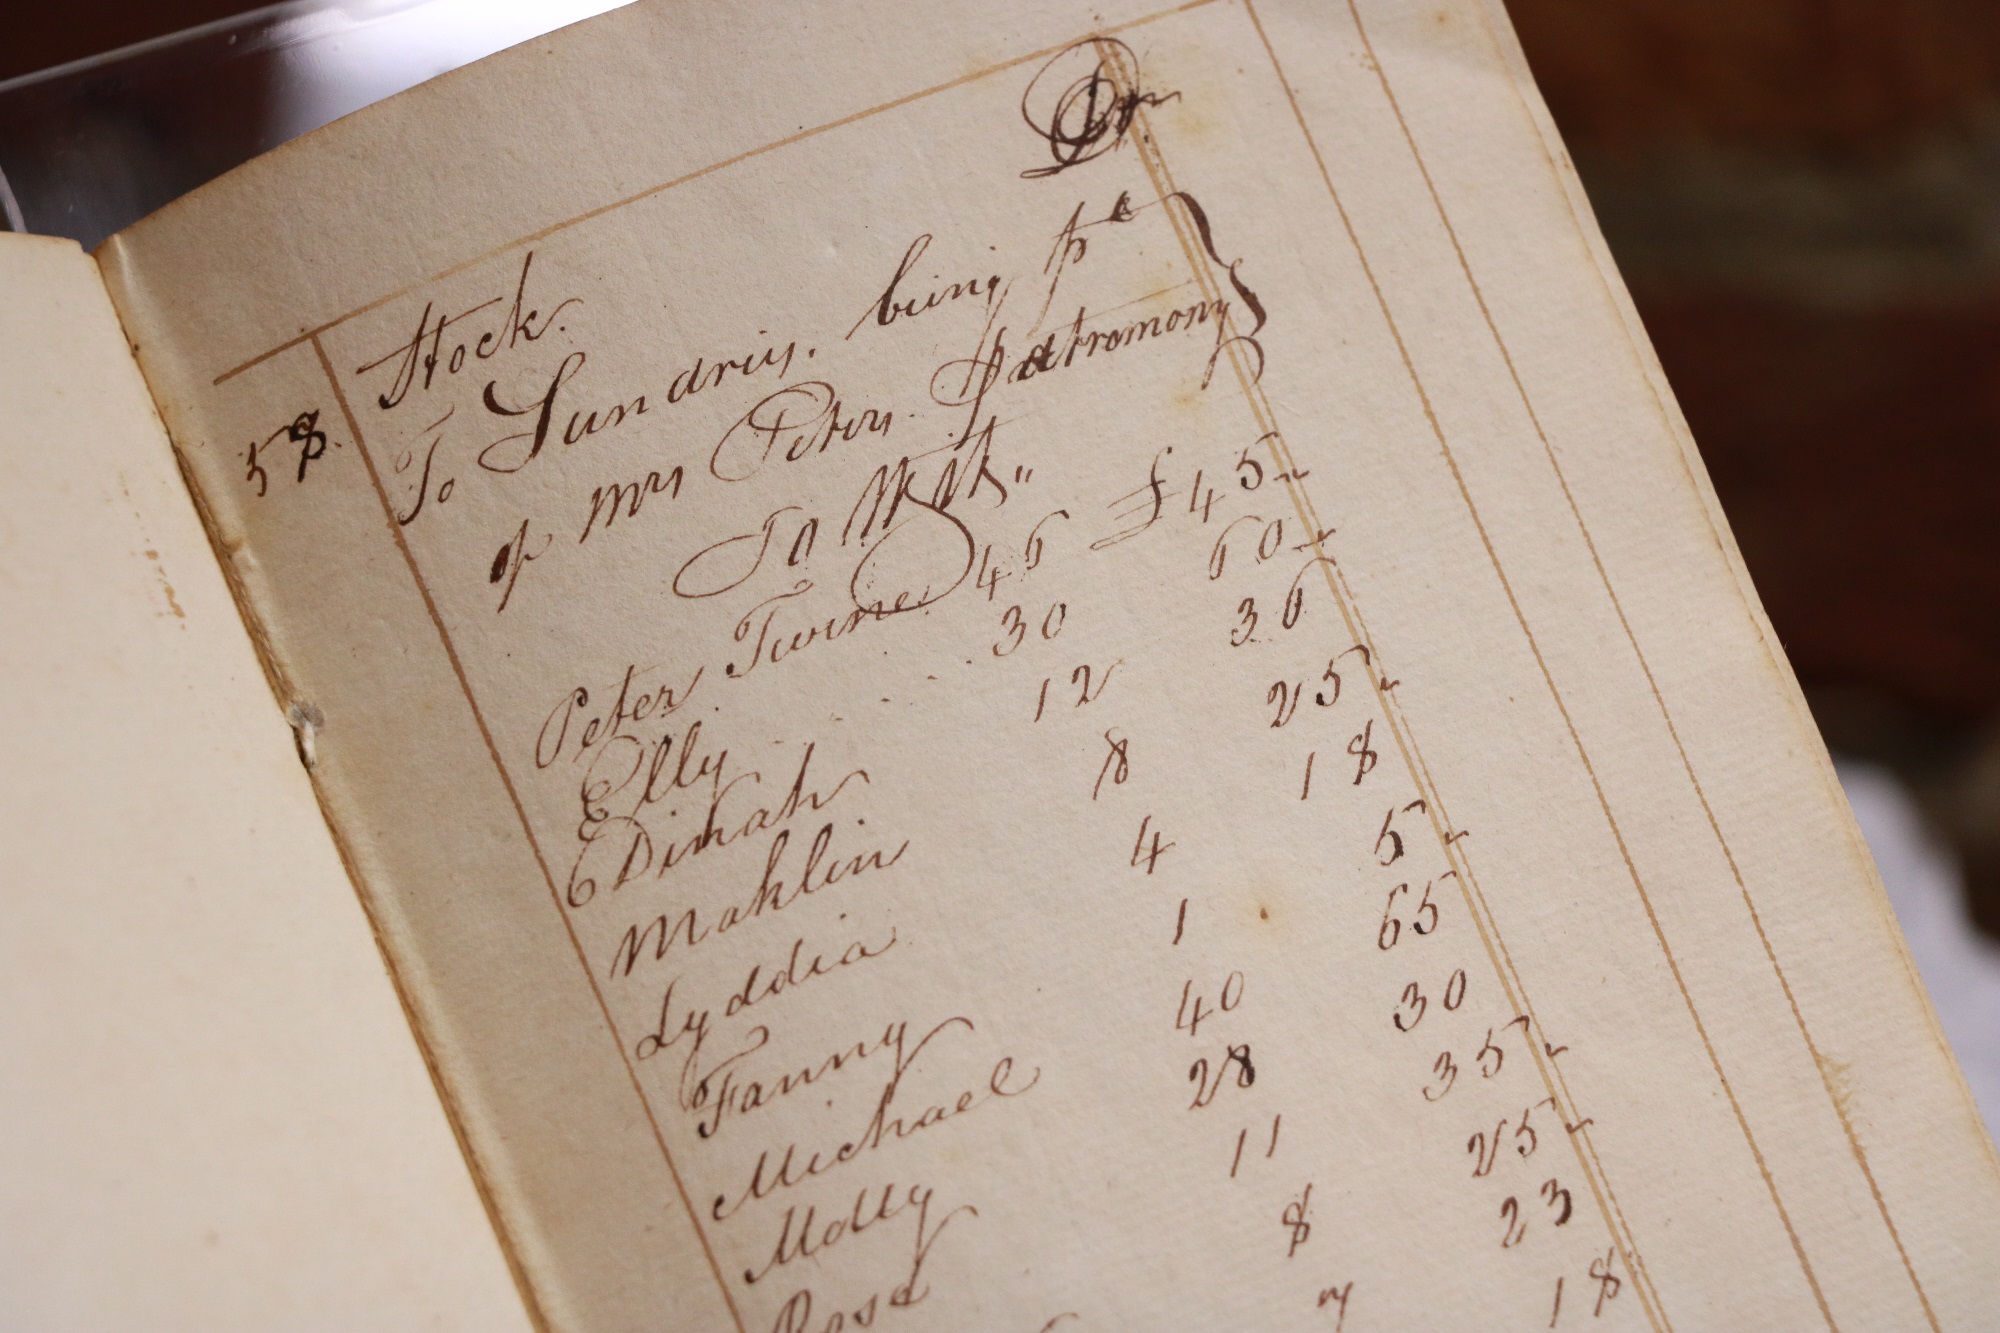 Snapshot of an old ledger from the 1800s titled, Stock, with a list of human names and their cost.